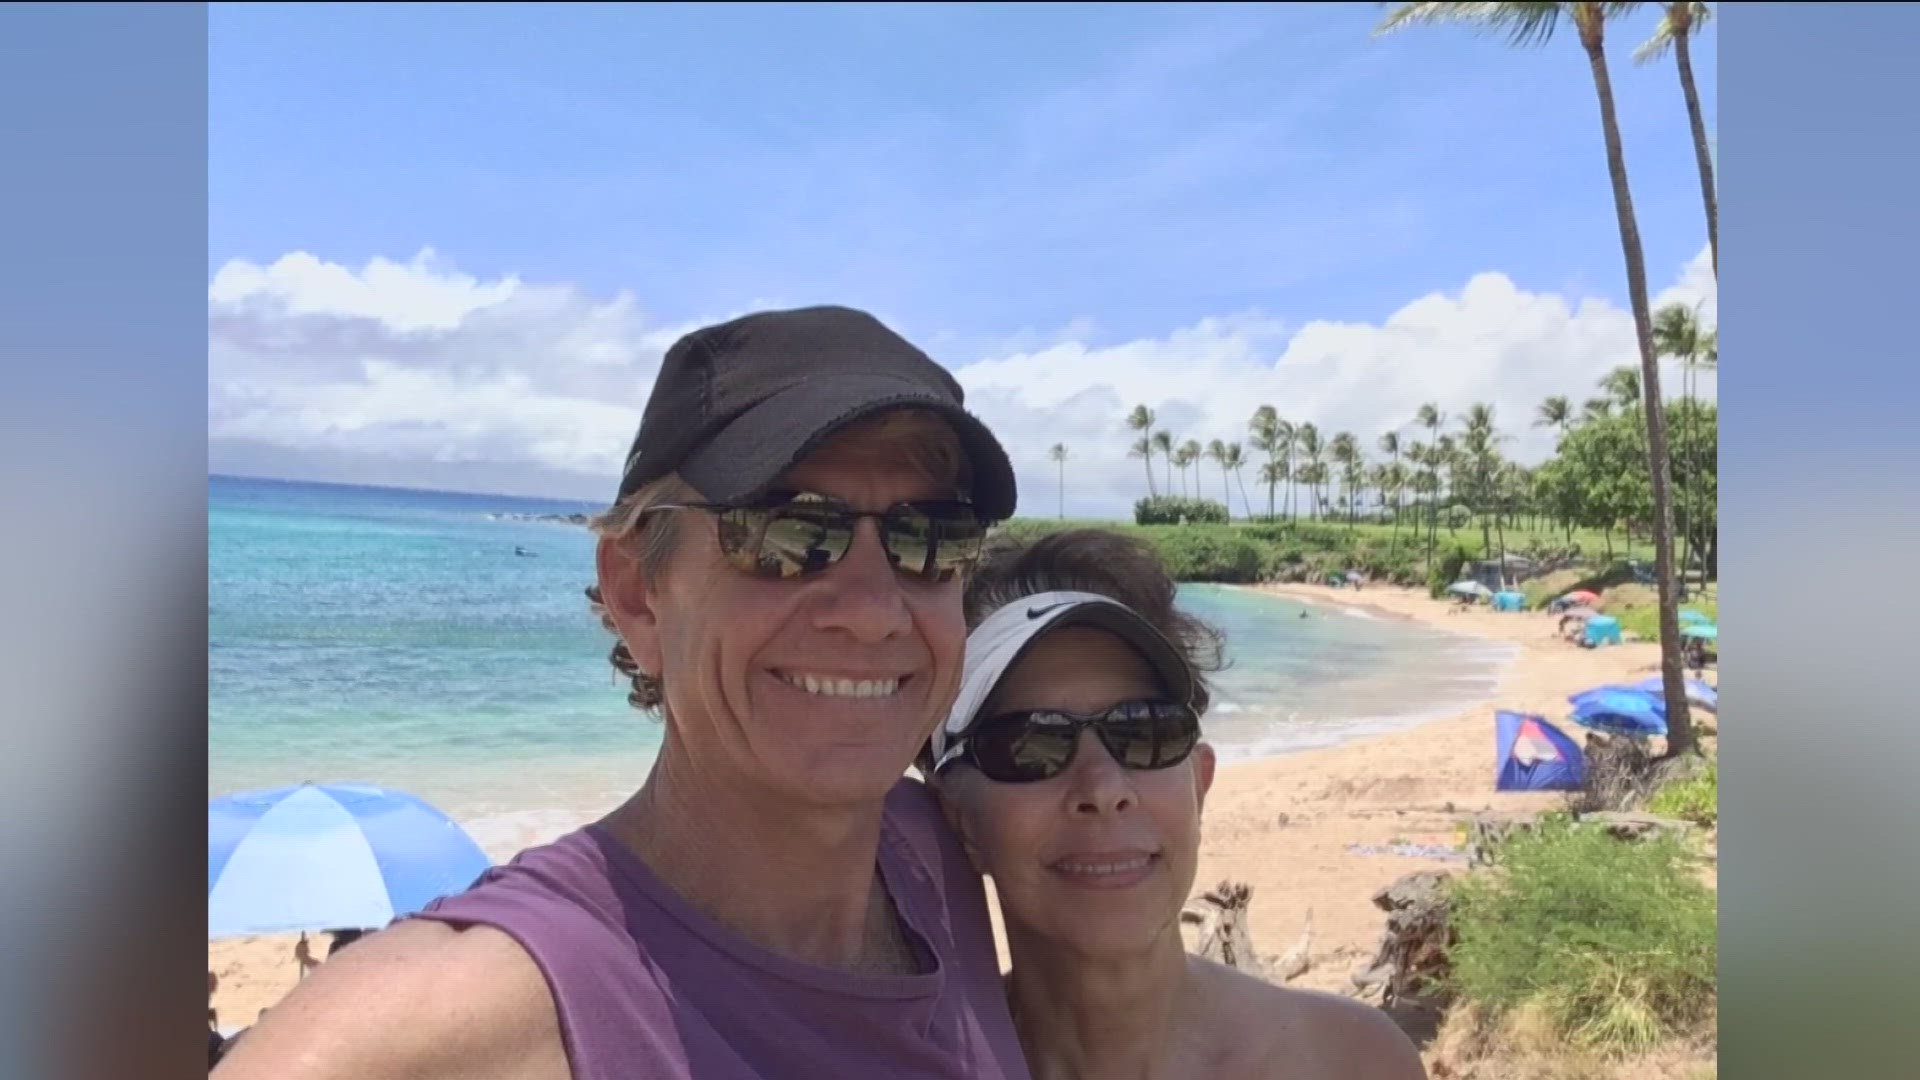 Laurie Allen moved to Lahaina more than a decade ago. She was badly burned and passed away from her injuries.